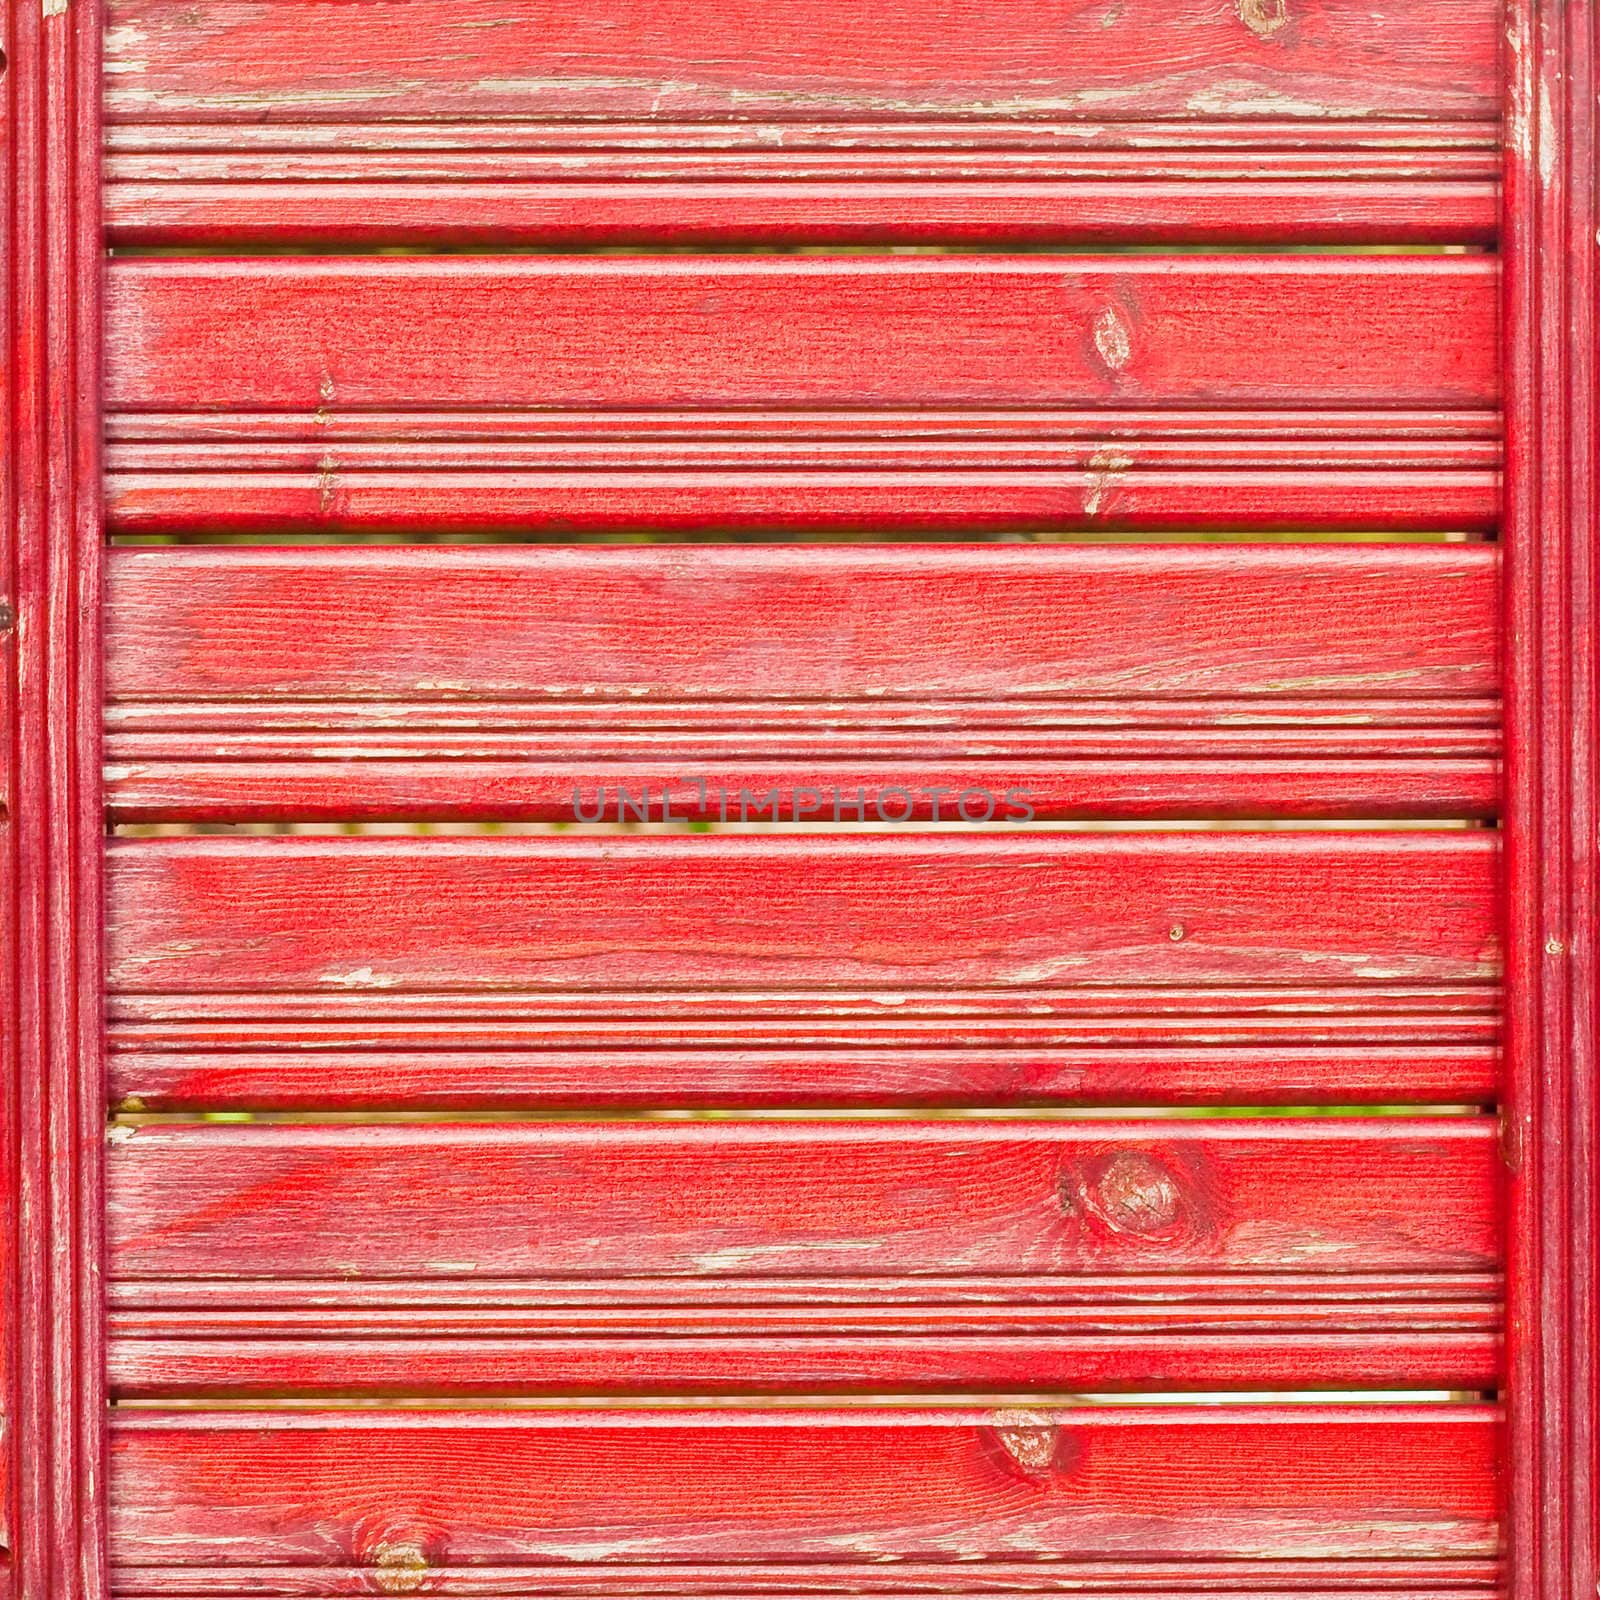 Colorful red wood panels as a background image